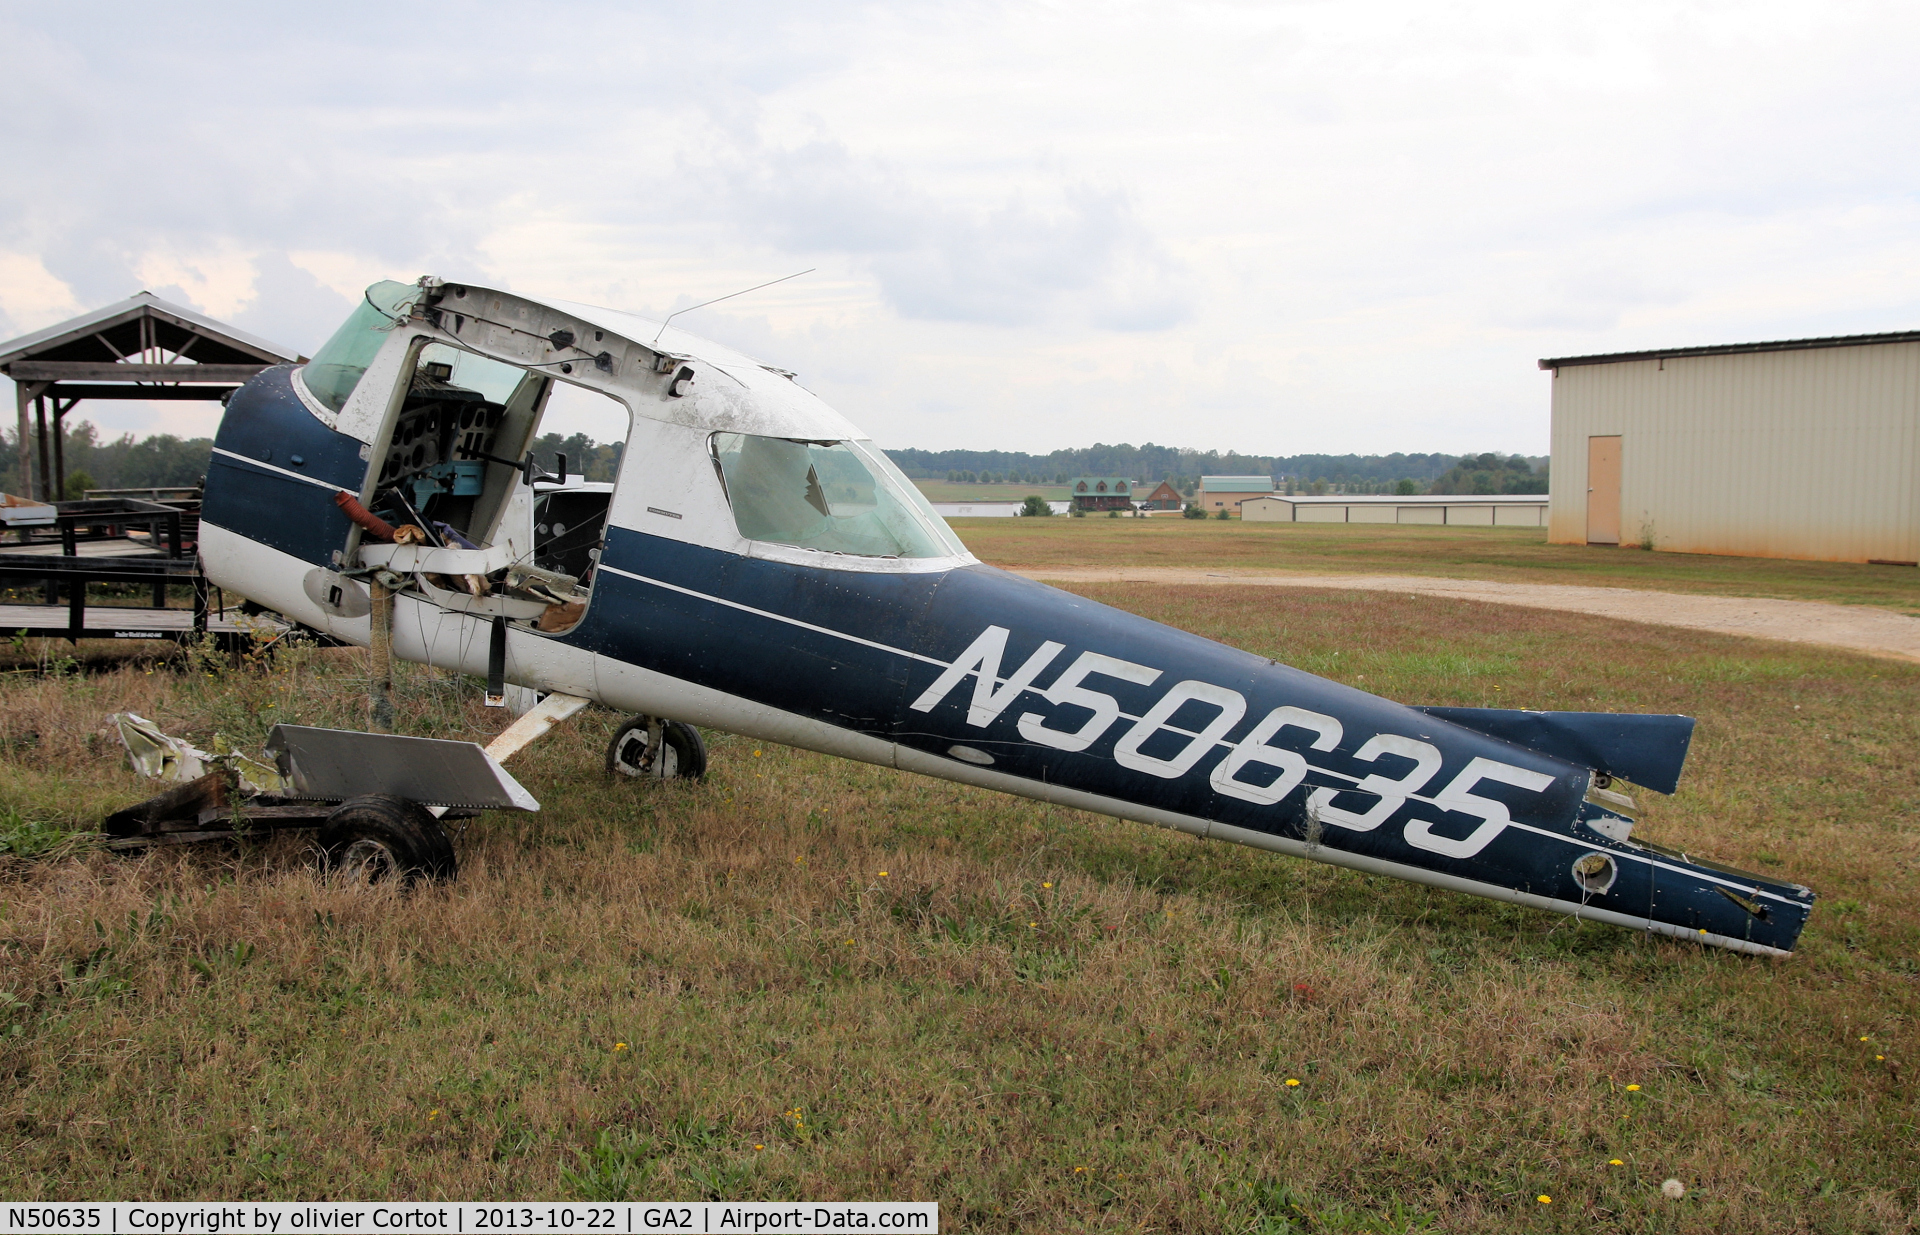 N50635, 1968 Cessna 150J C/N 15069451, ready for a ride ! ^^